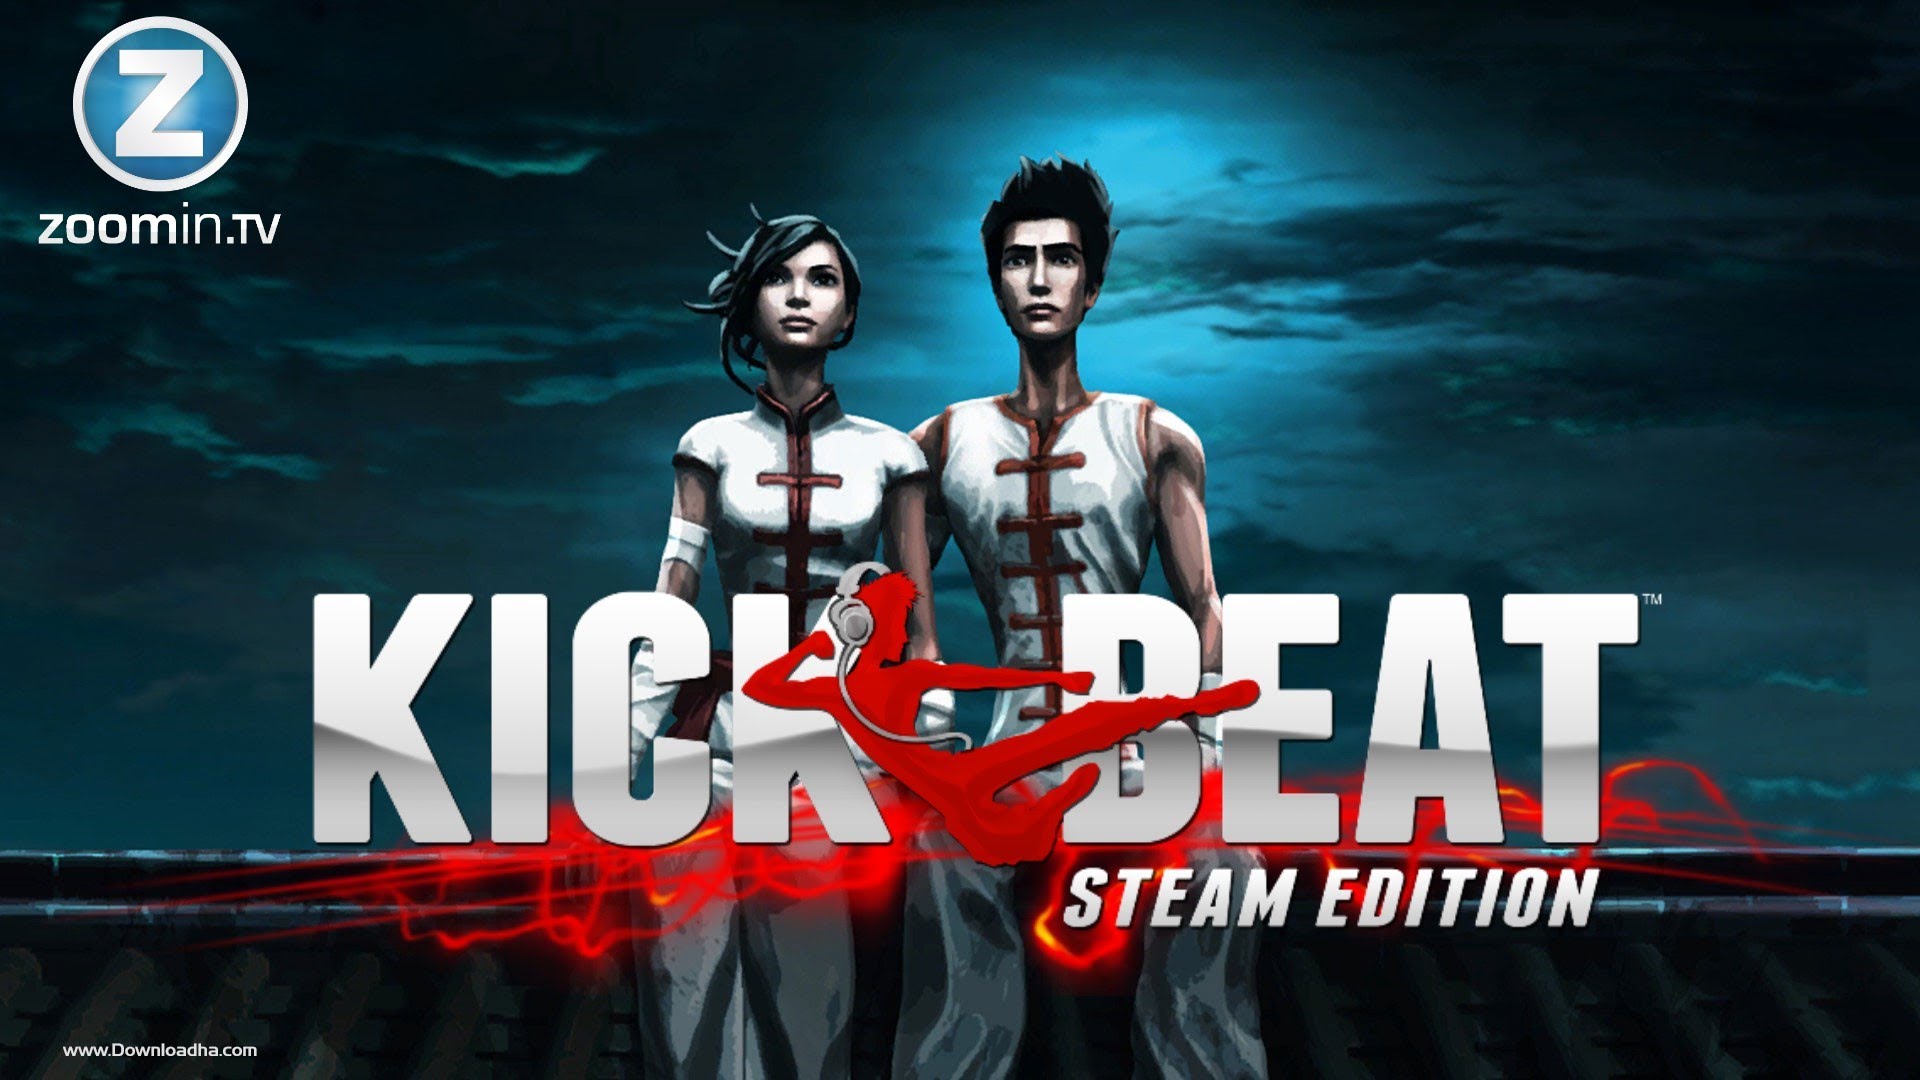 Nice Images Collection: KickBeat Steam Edition Desktop Wallpapers